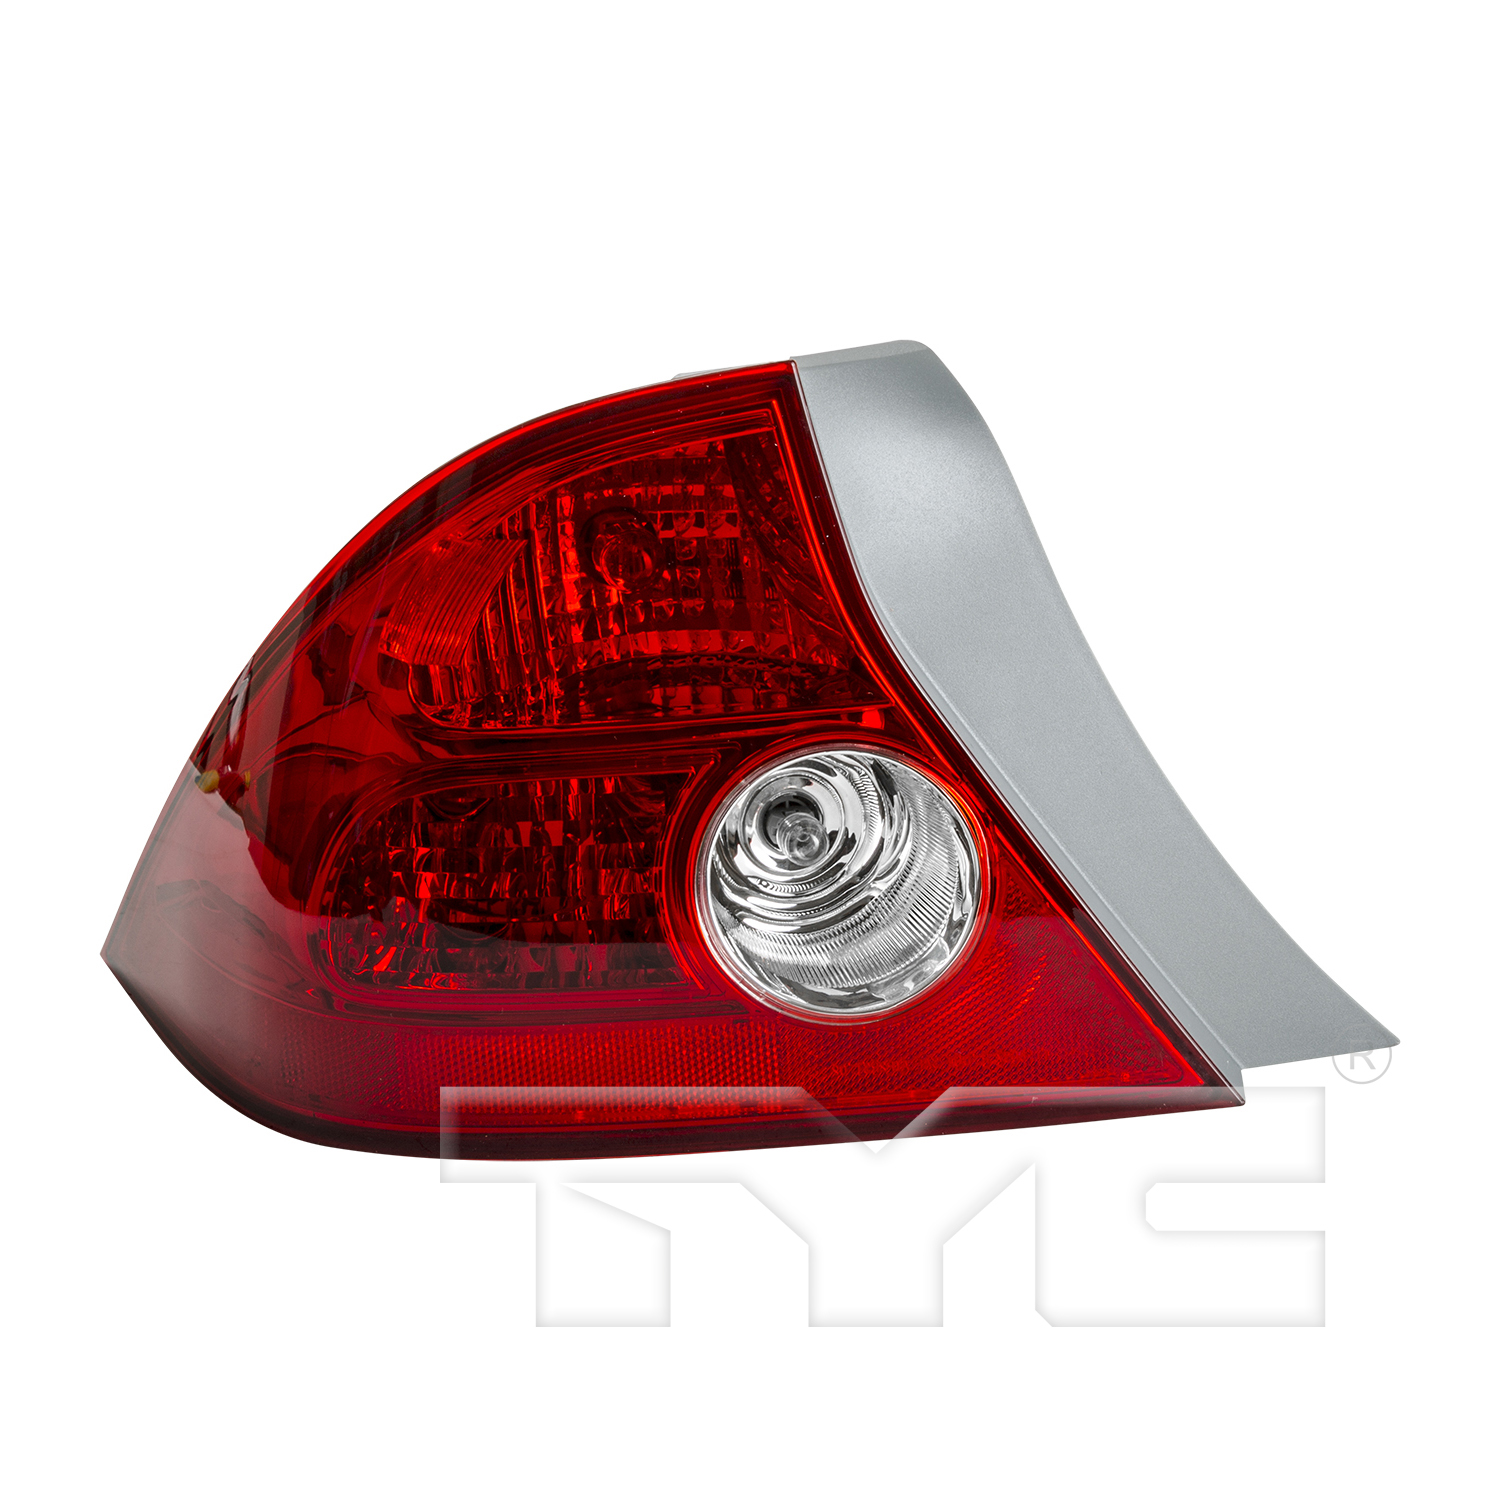 Aftermarket TAILLIGHTS for HONDA - CIVIC, CIVIC,04-05,LT Taillamp assy